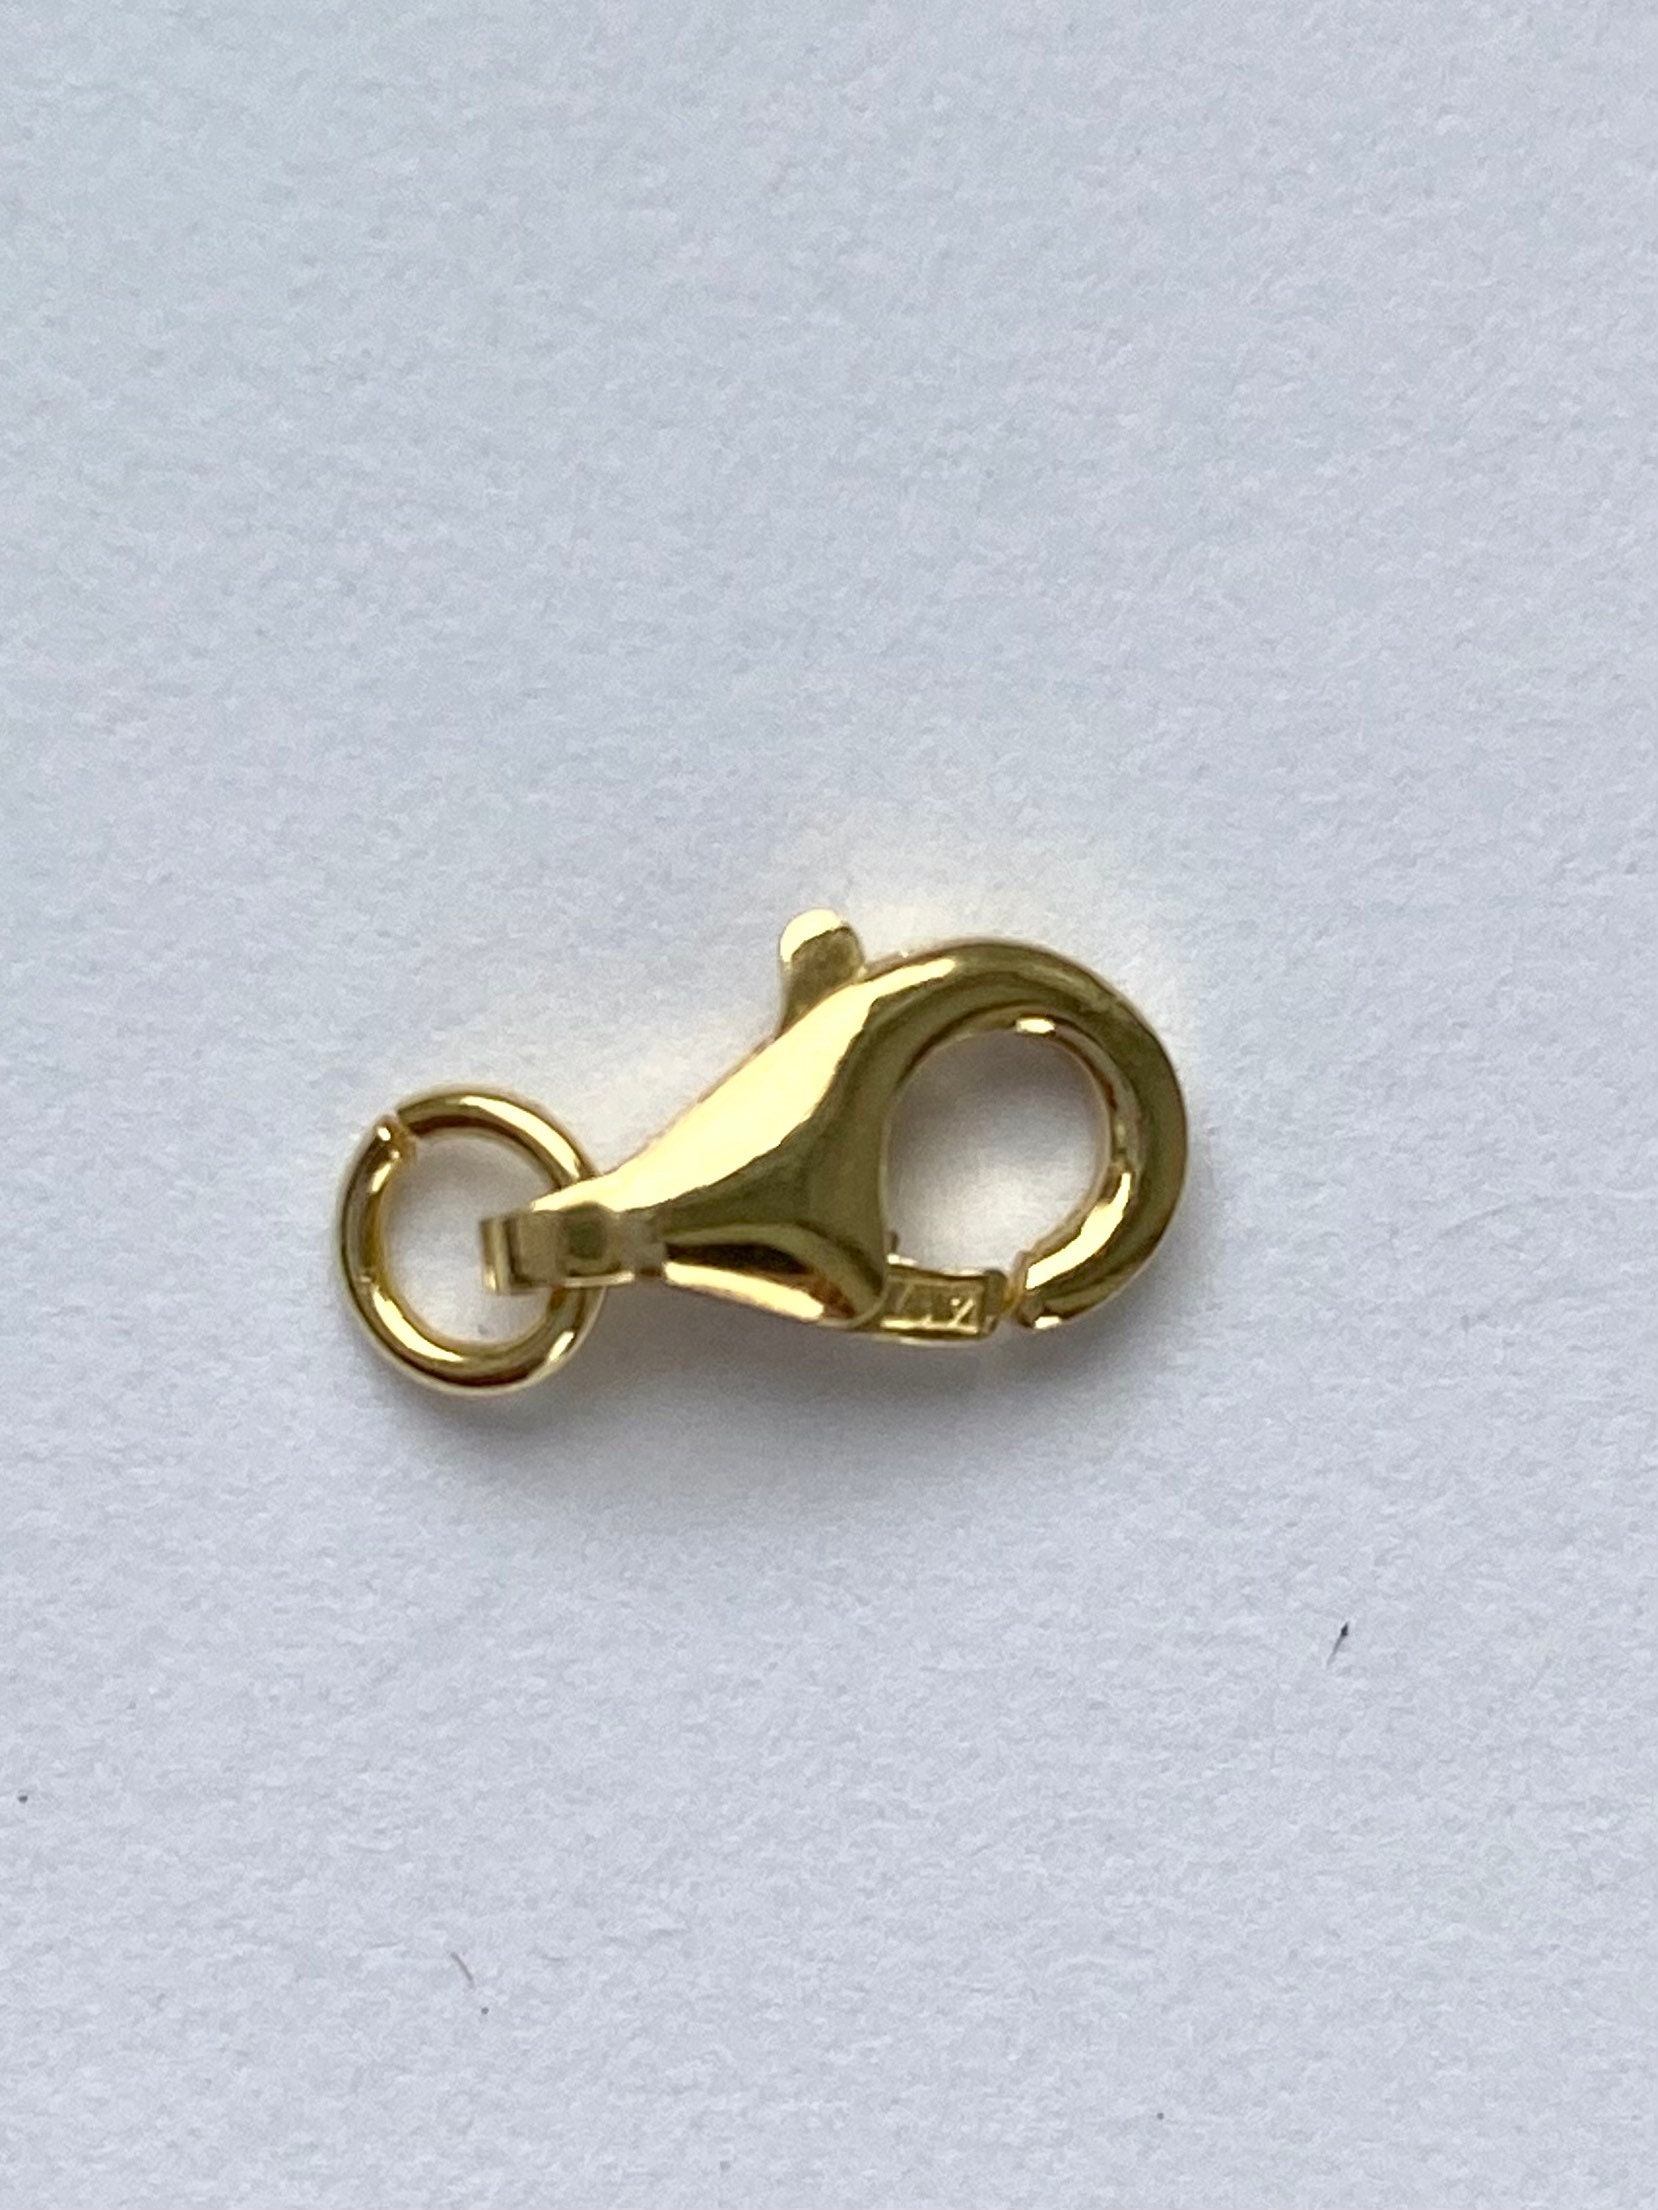 Pear Lobster Clasp, 10K Solid Gold, Yellow and White Gold, Chain Clasp  Gold, Jewelry Supplies, Craft Supplies, Best Quality Clasp 